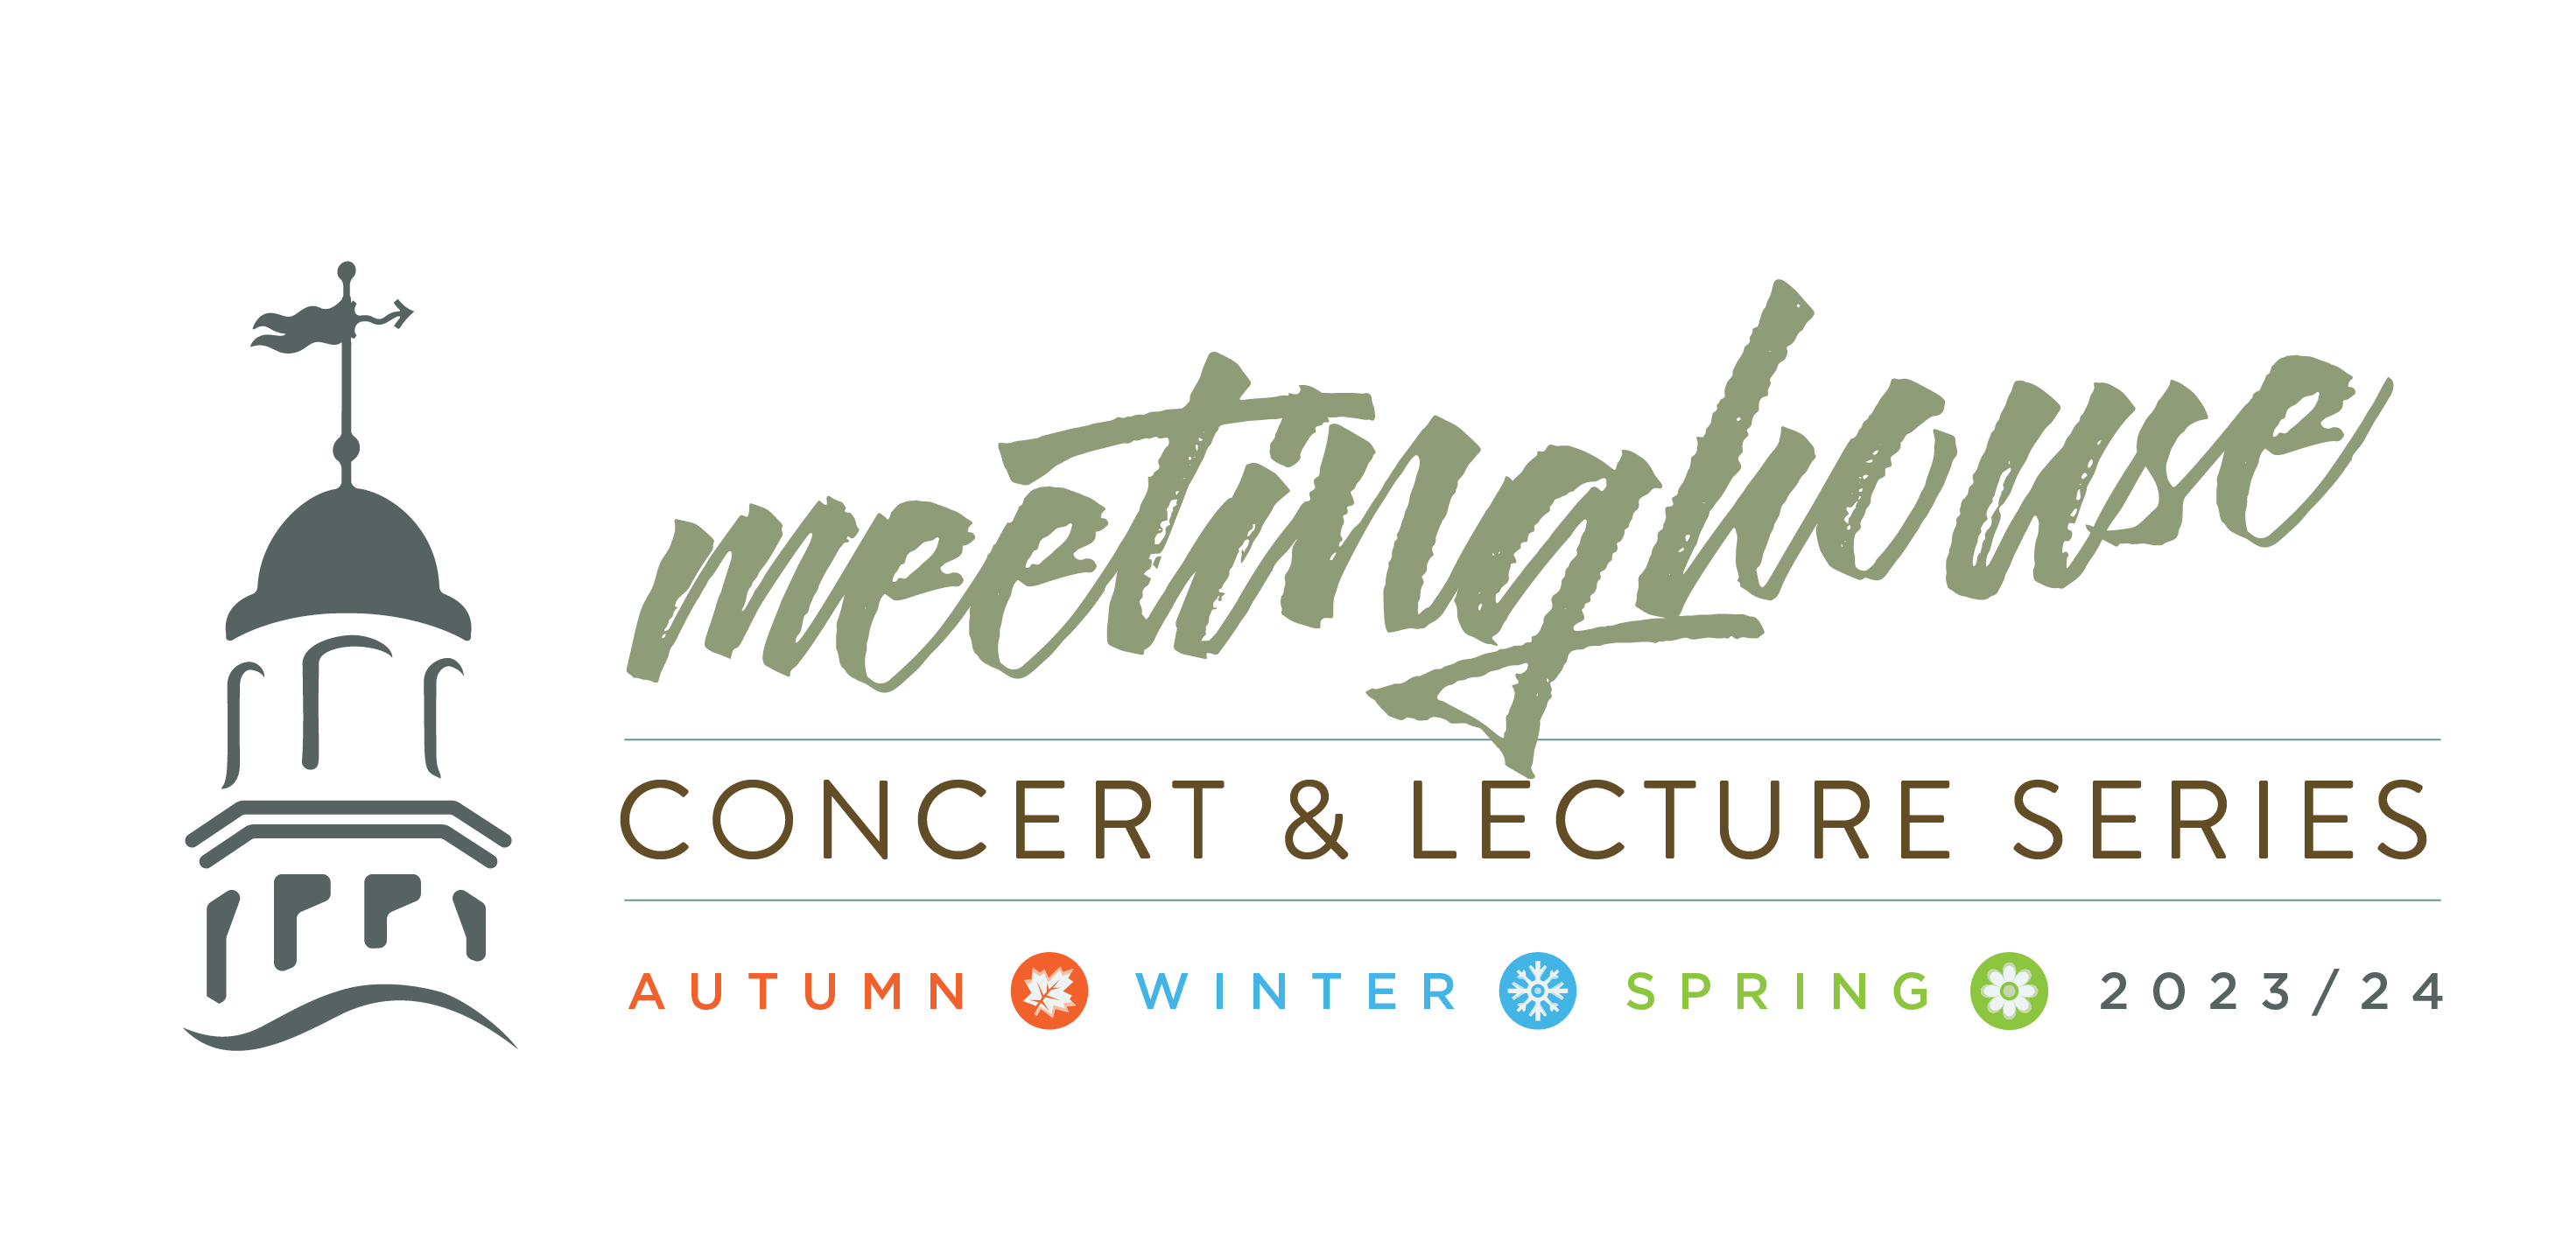 Meetinghouse Concert & Event Series